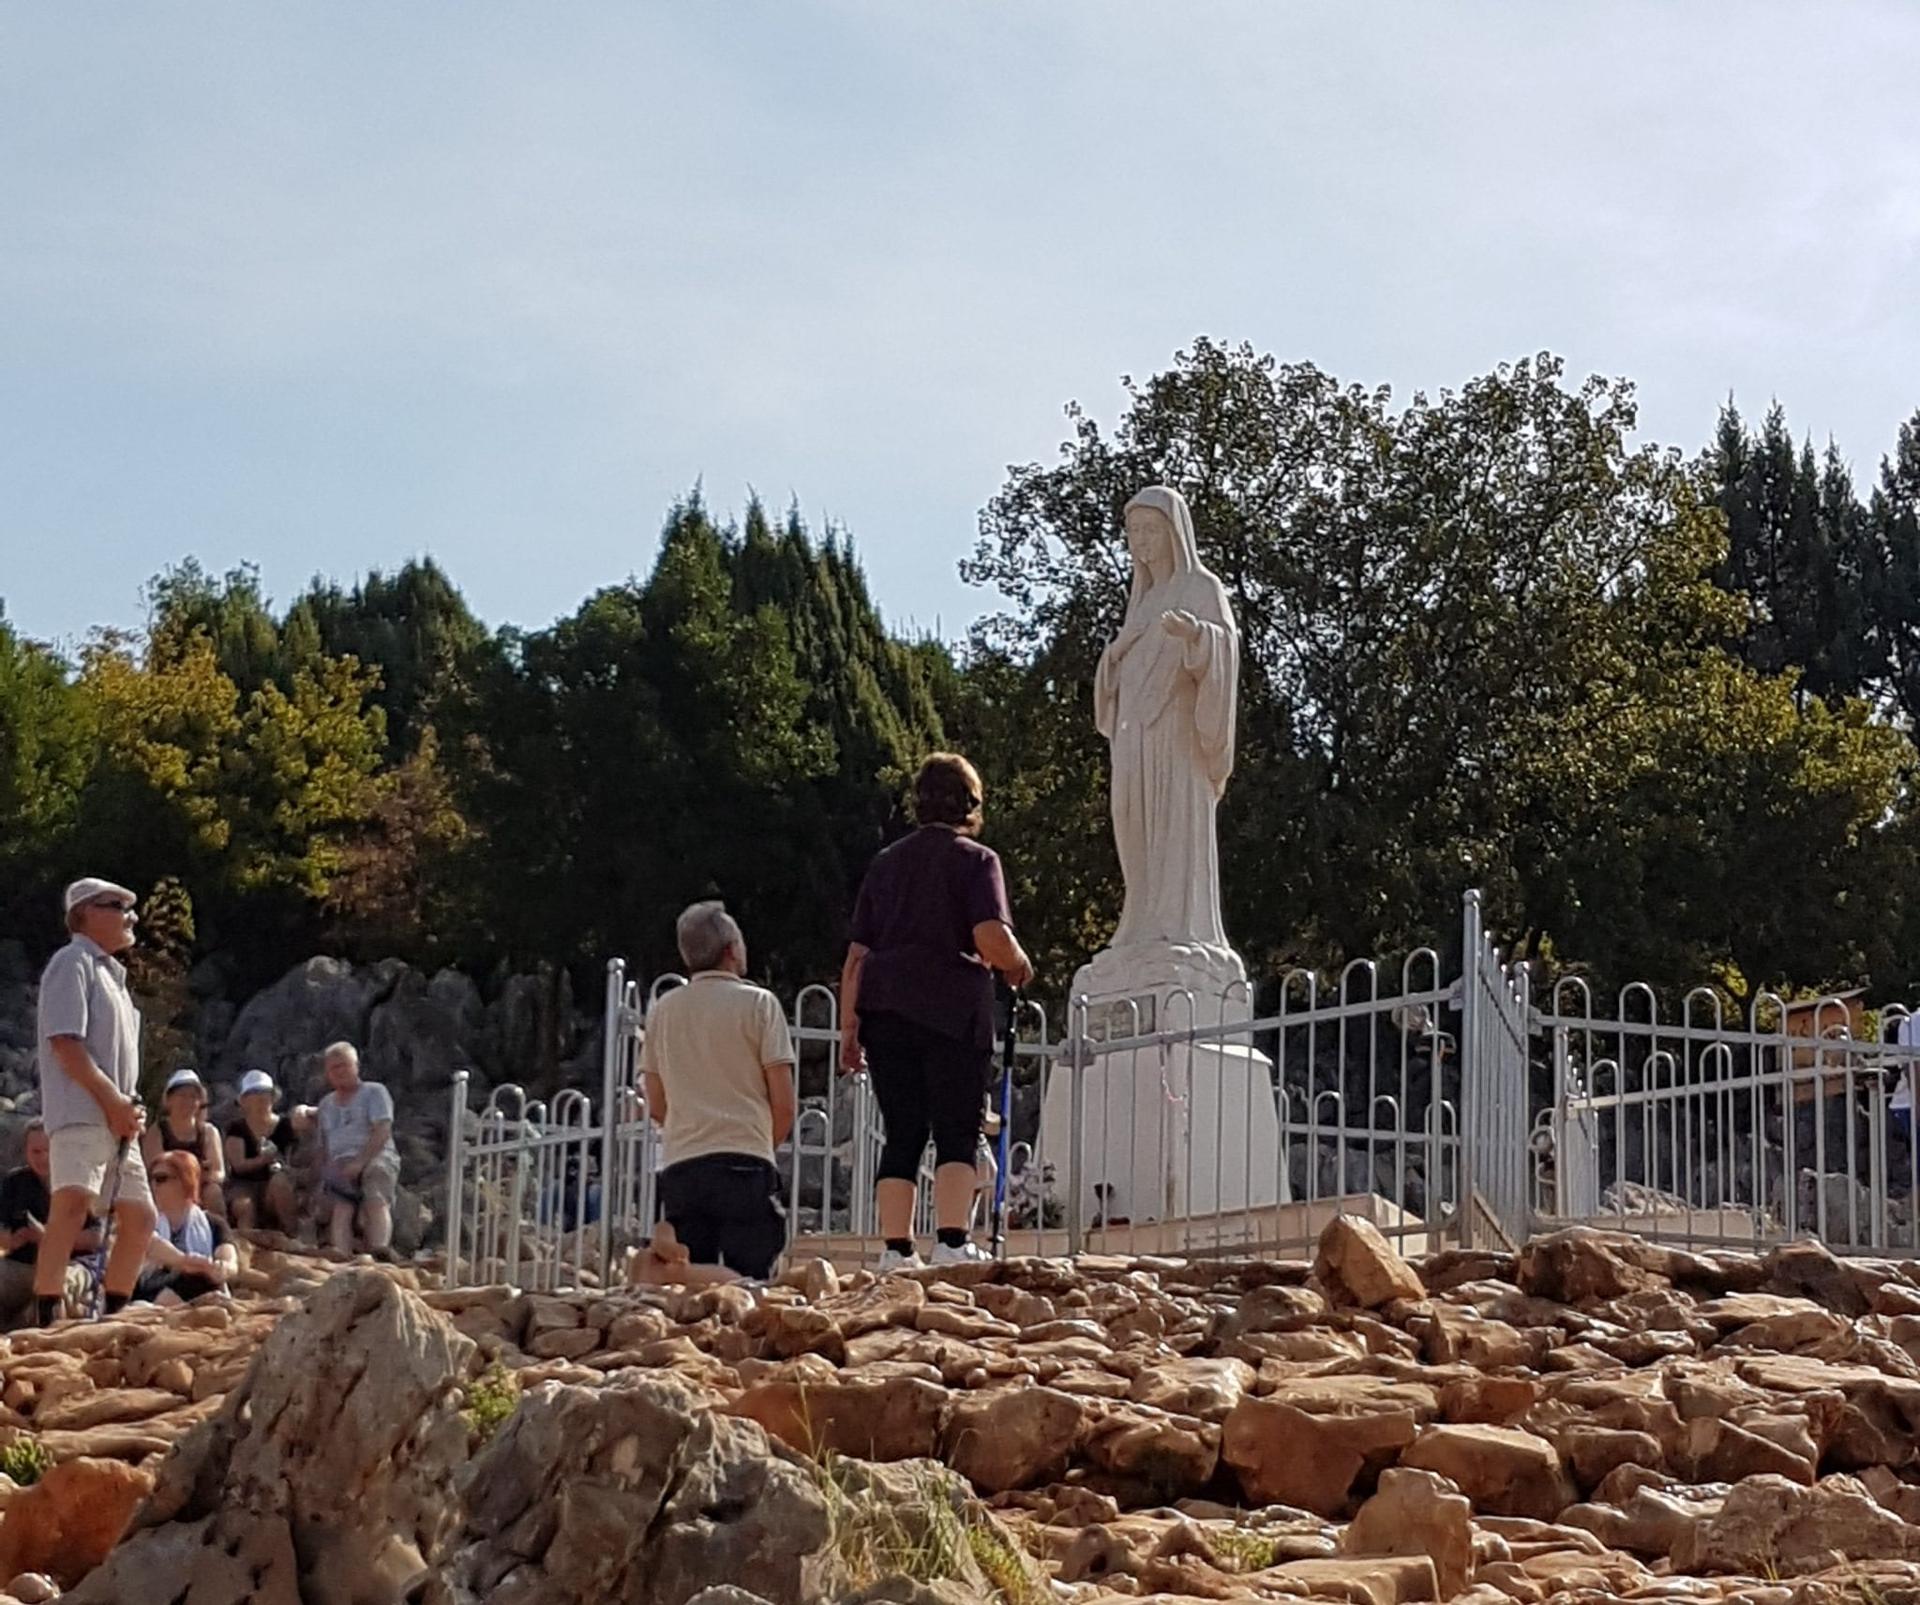 As debate rages over Medjugorje, maybe a place of prayer is enough